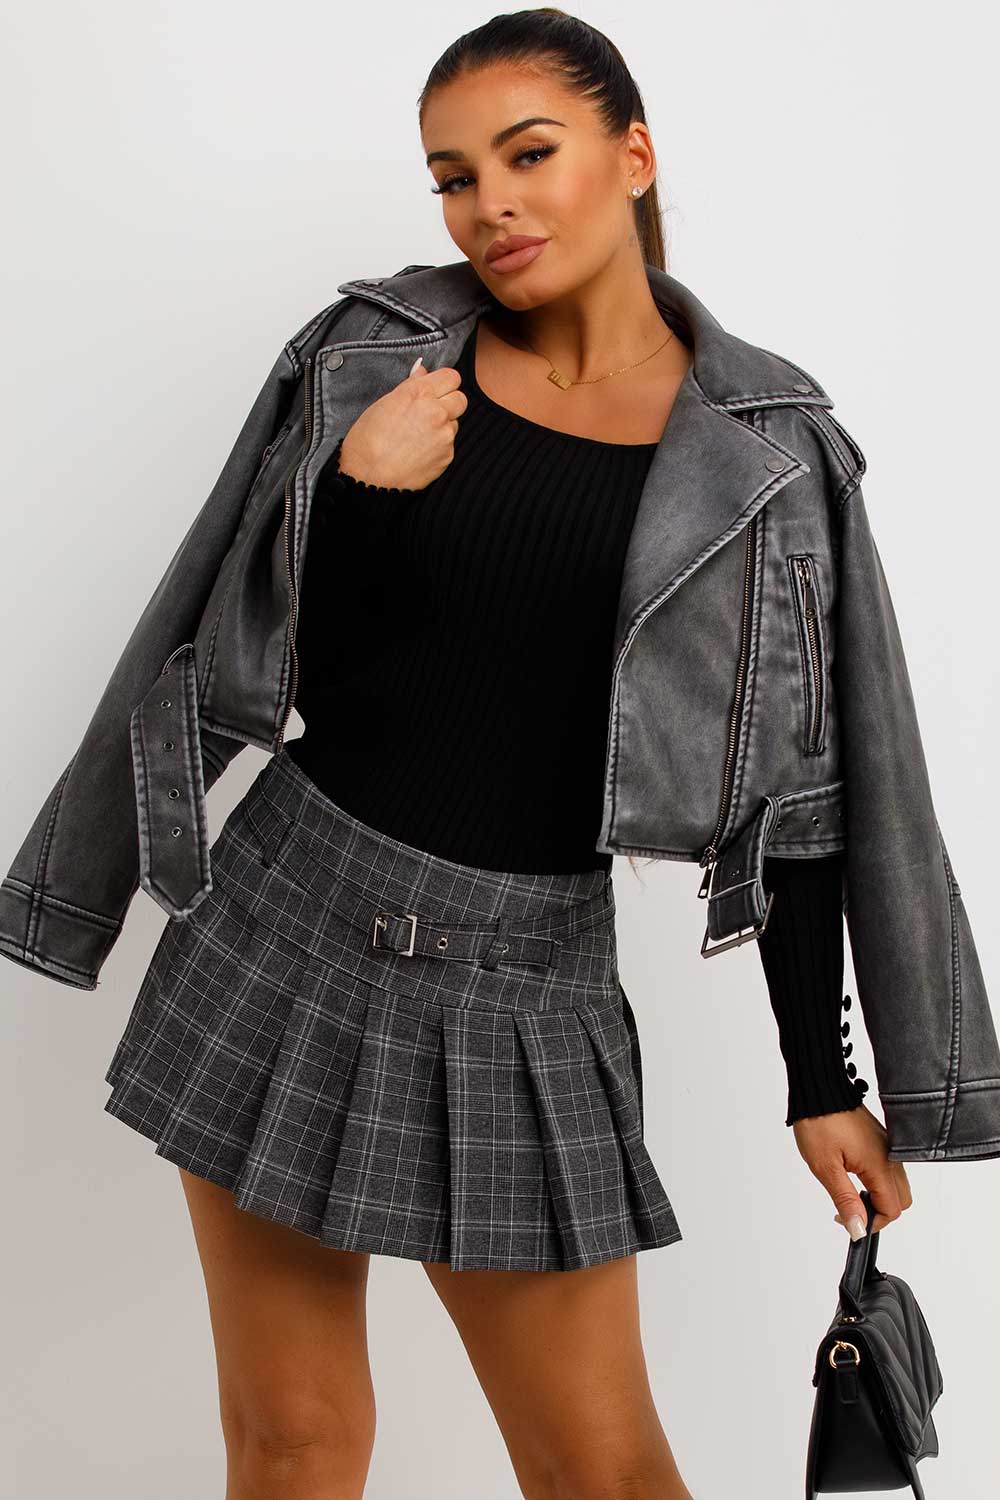 pleated mini skirt low rise going out festival rave outfit